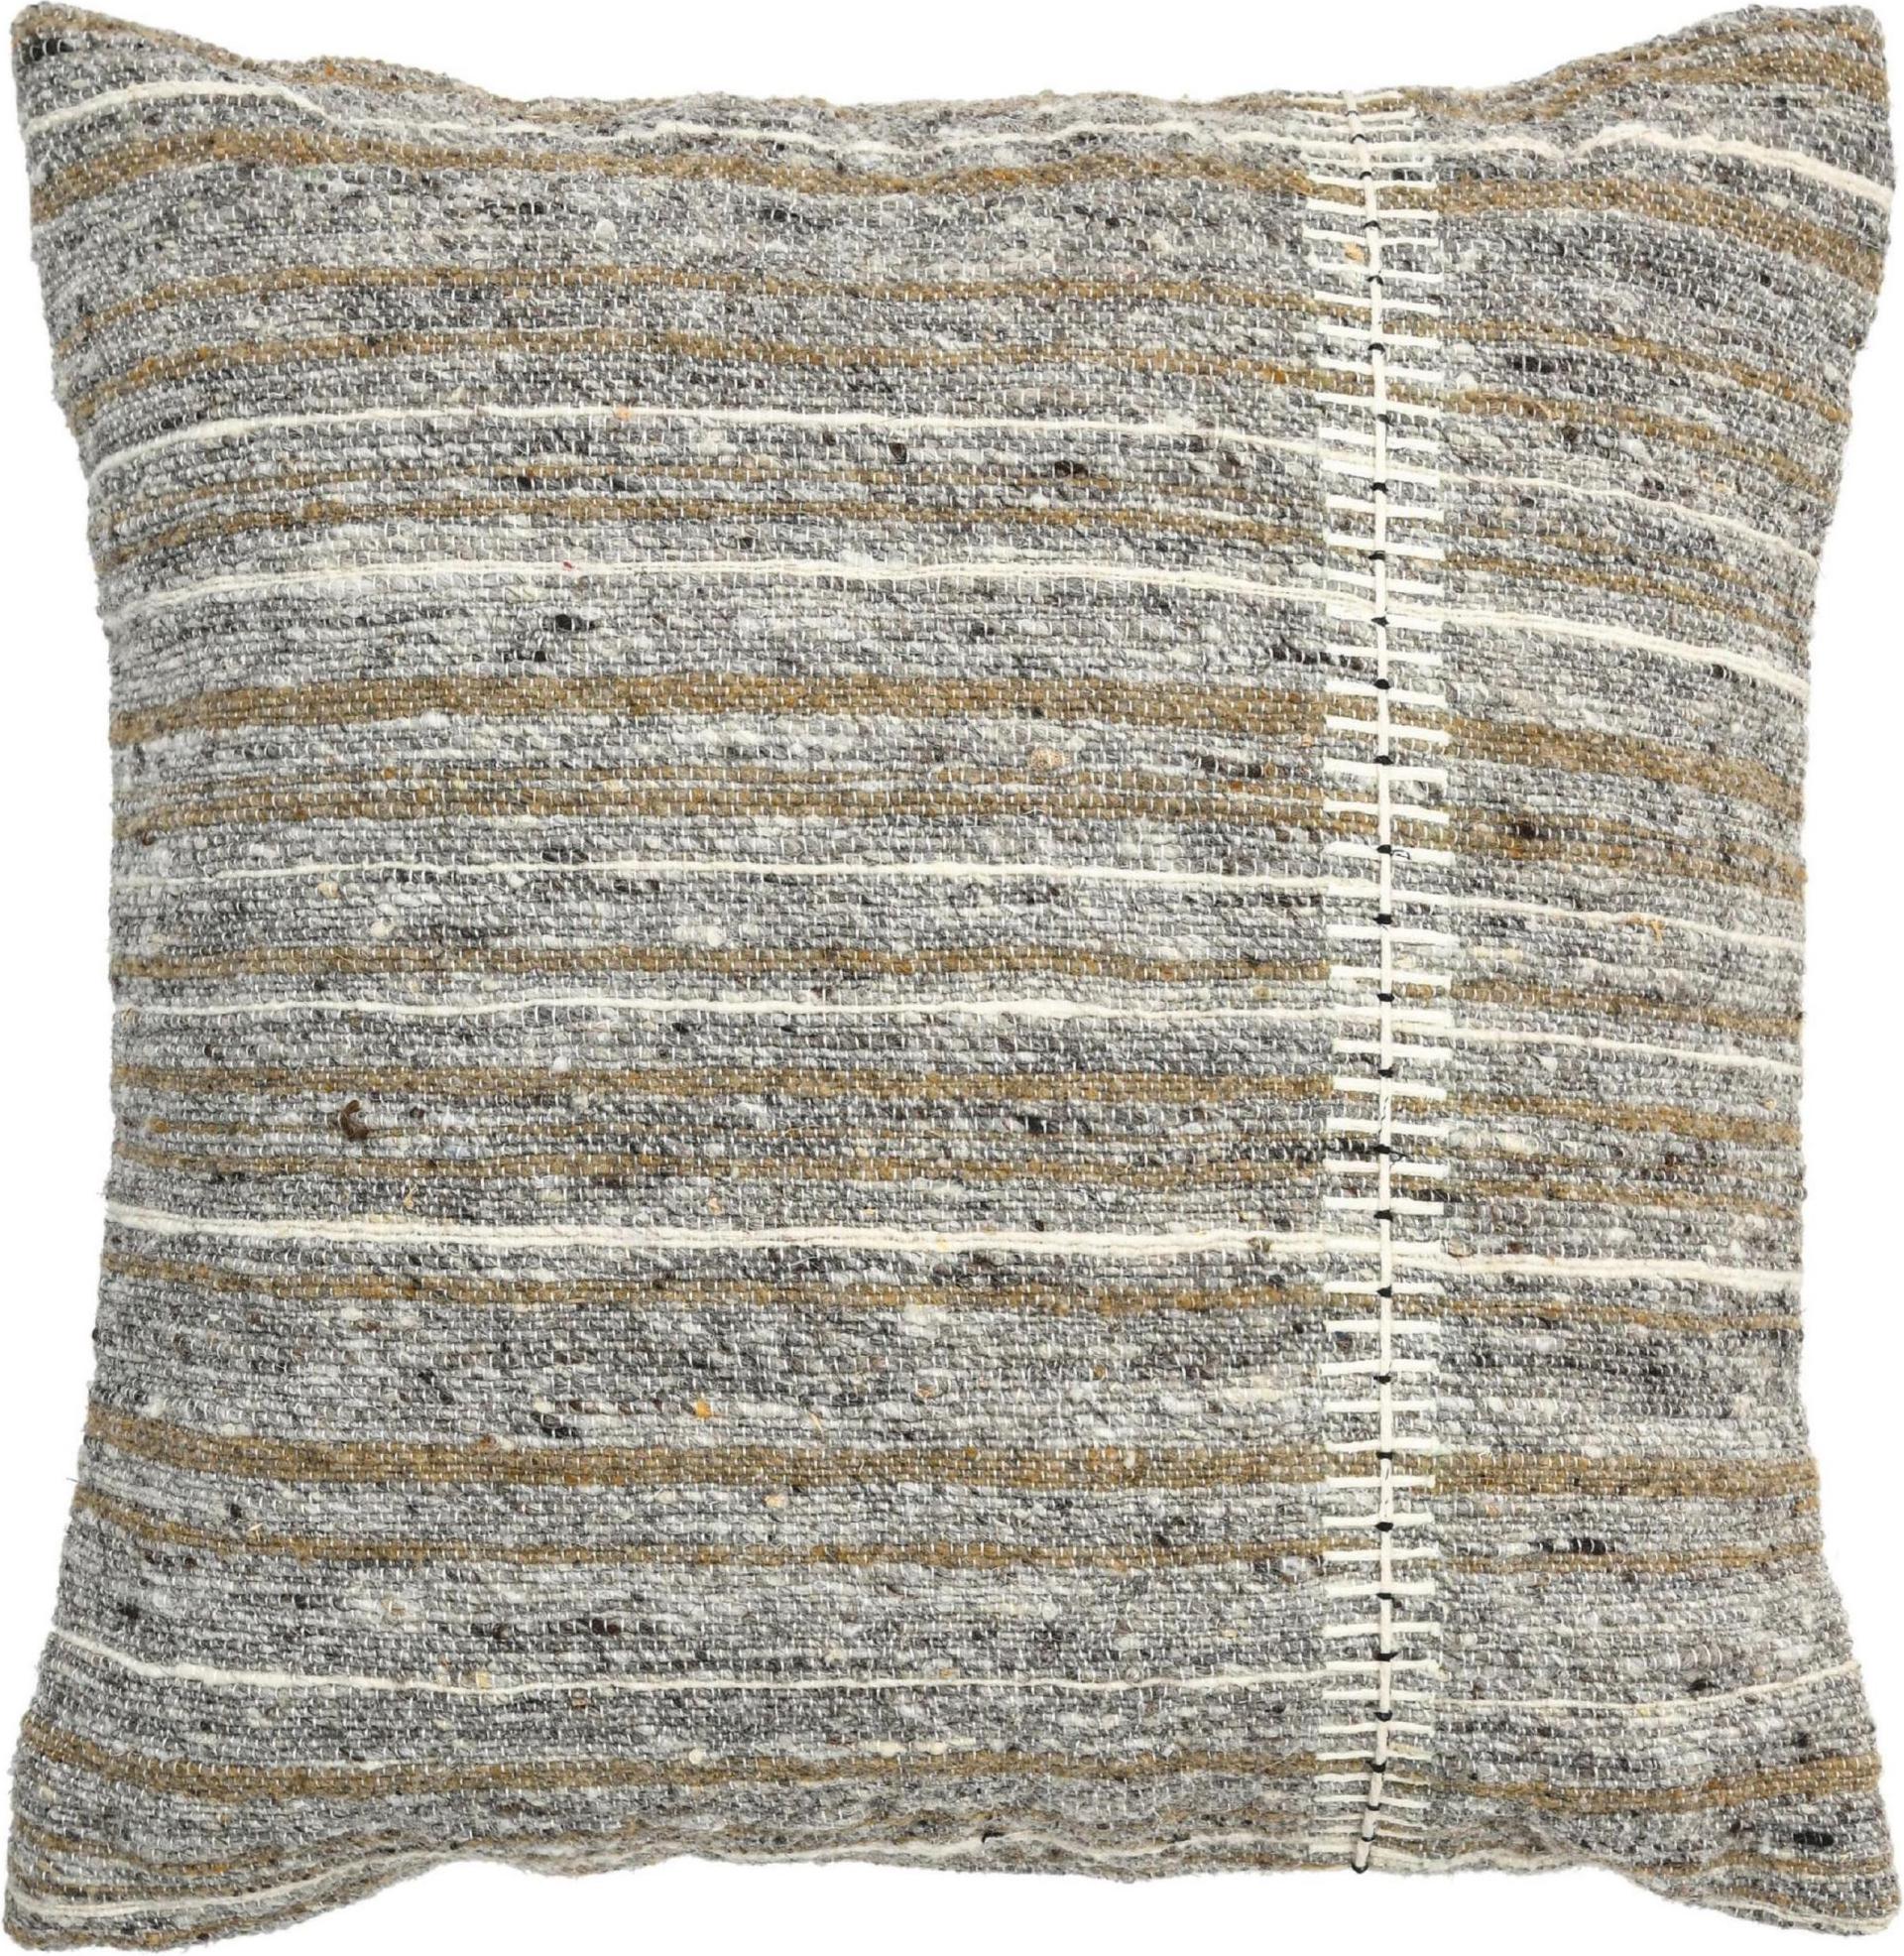 Hand-Knotted Boho Chic Style Modern Wool and Cotton Pillow In Muted Tones For Sale